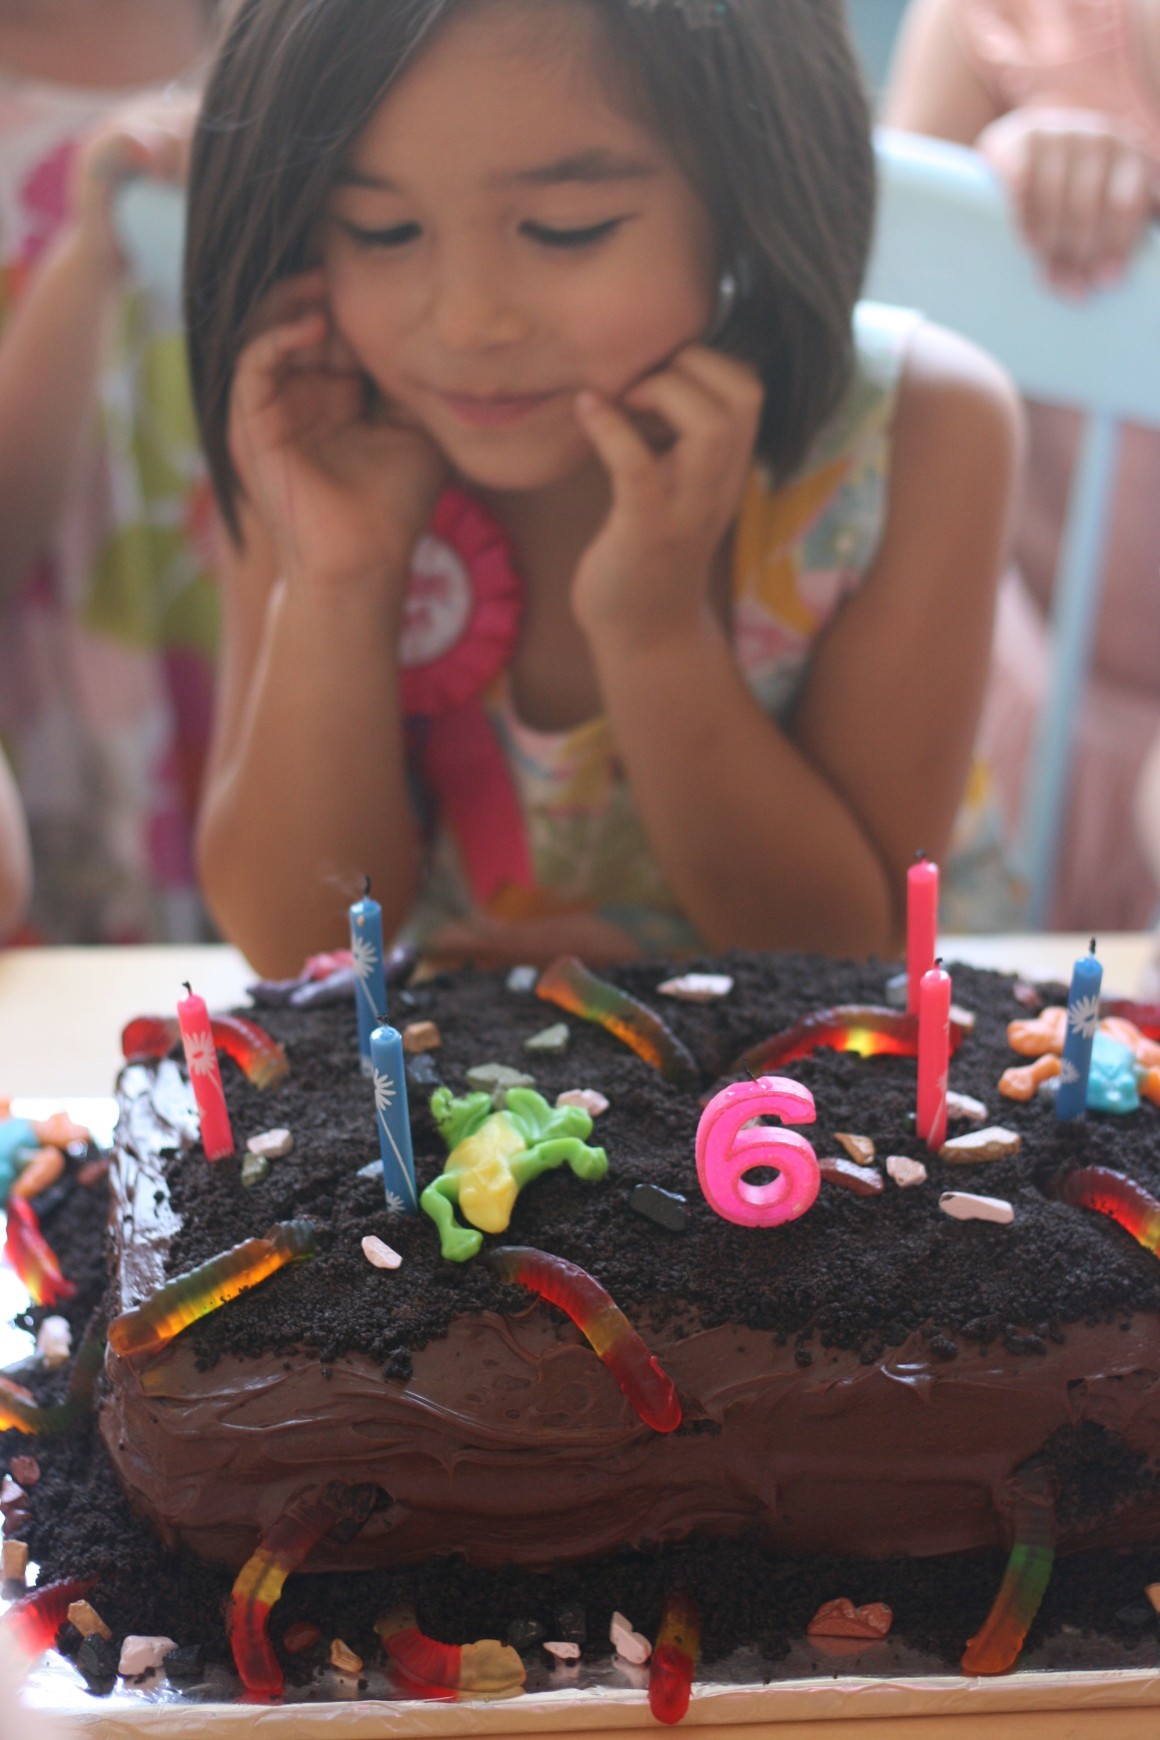 Celebrate your bug crazy kiddo's special day with these easy DIY Bug Birthday ideas